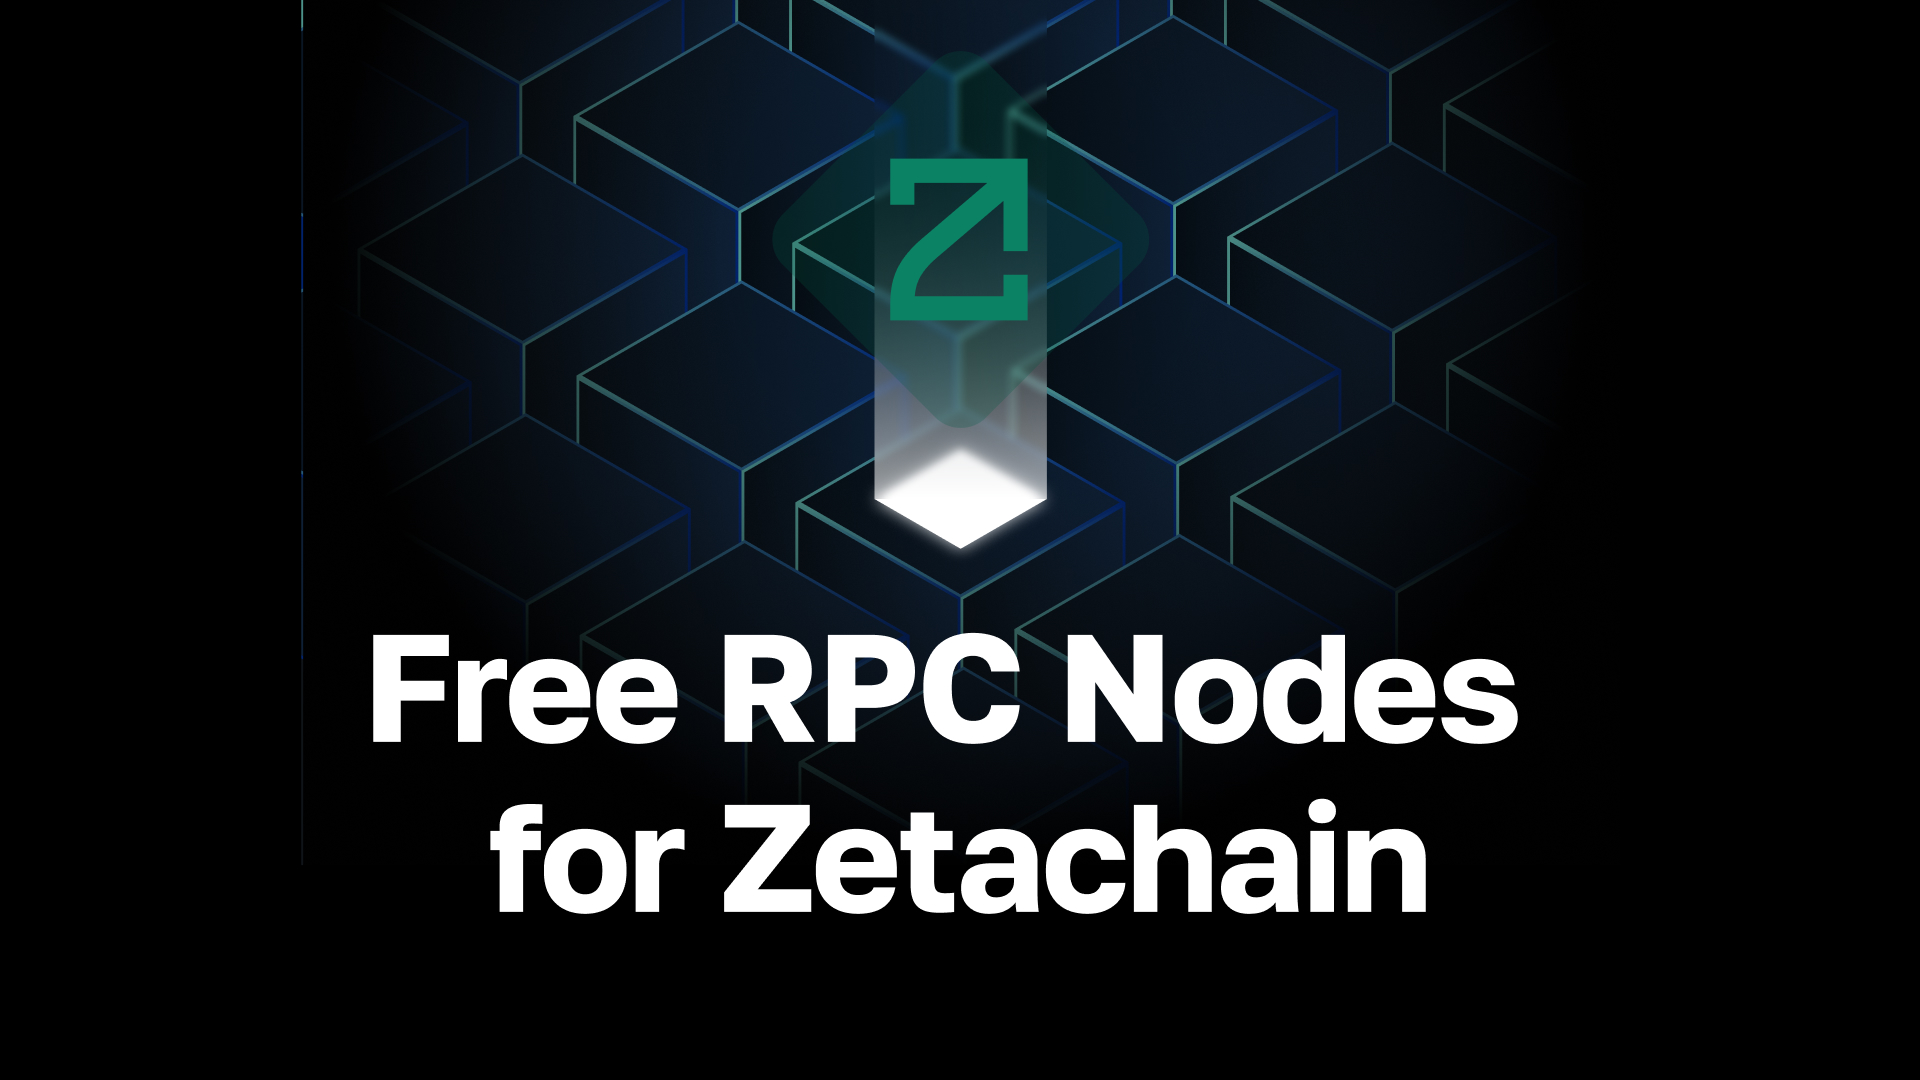 Image with ZetaChain logo and text: "Free RPC Nodes for ZetaChain"